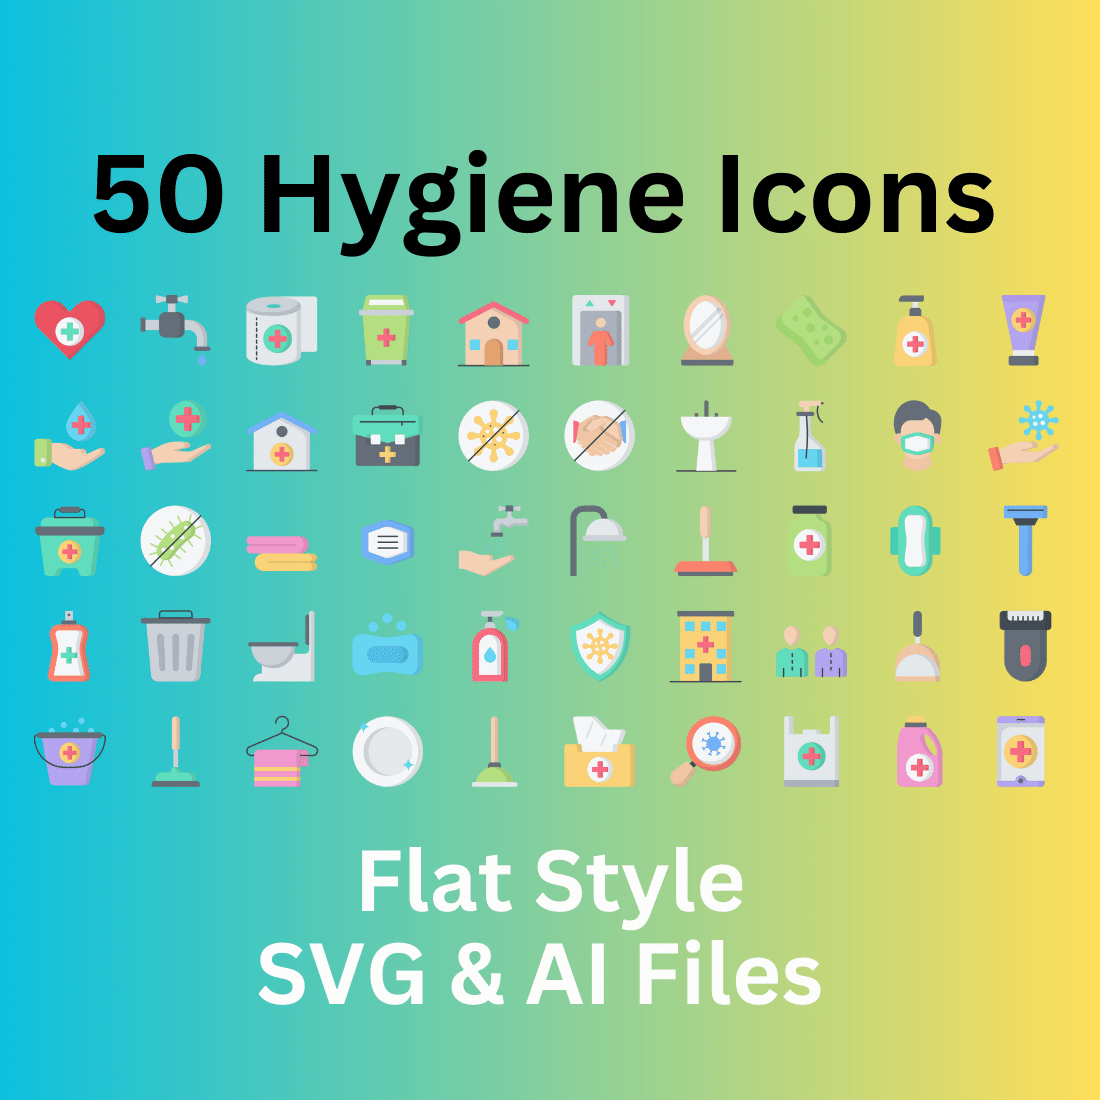 Hygiene Icon Set 50 Flat Icons - SVG And AI Files cover image.